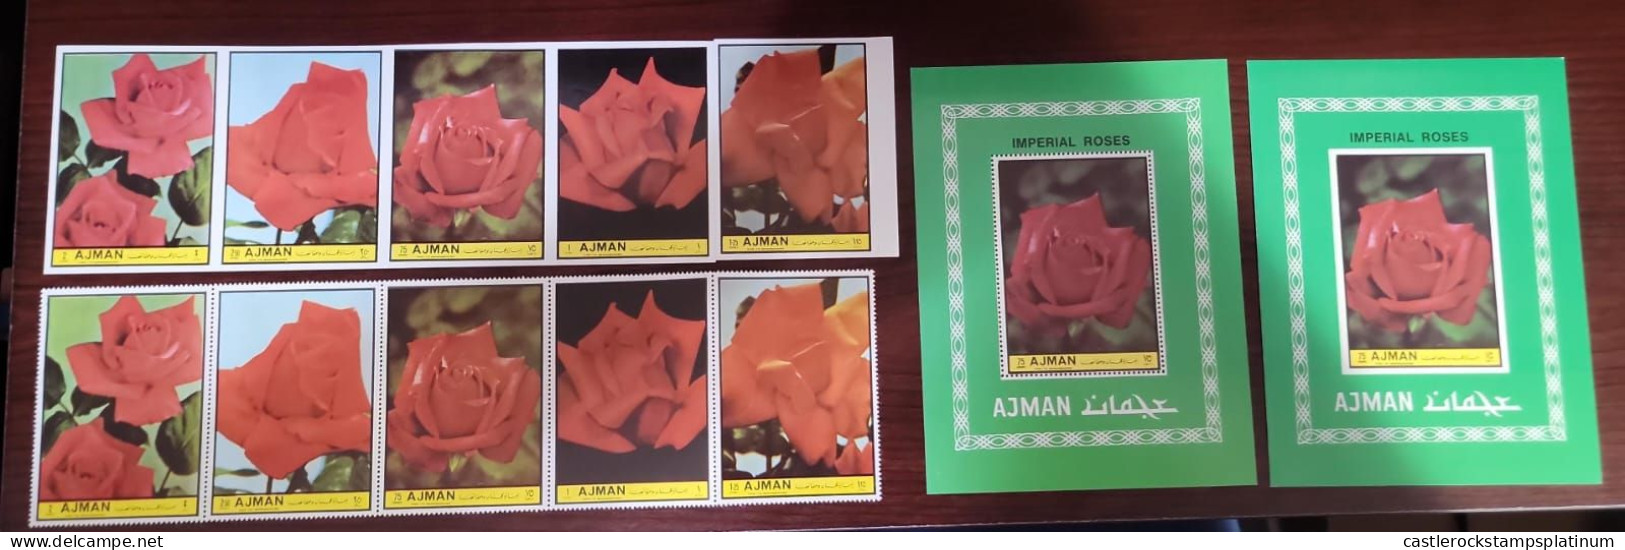 O) 1972 AJMAN, PERFORATE AND IMPERFORATE, FLOWERS - IMPERIAL ROSES, MNH - Ajman